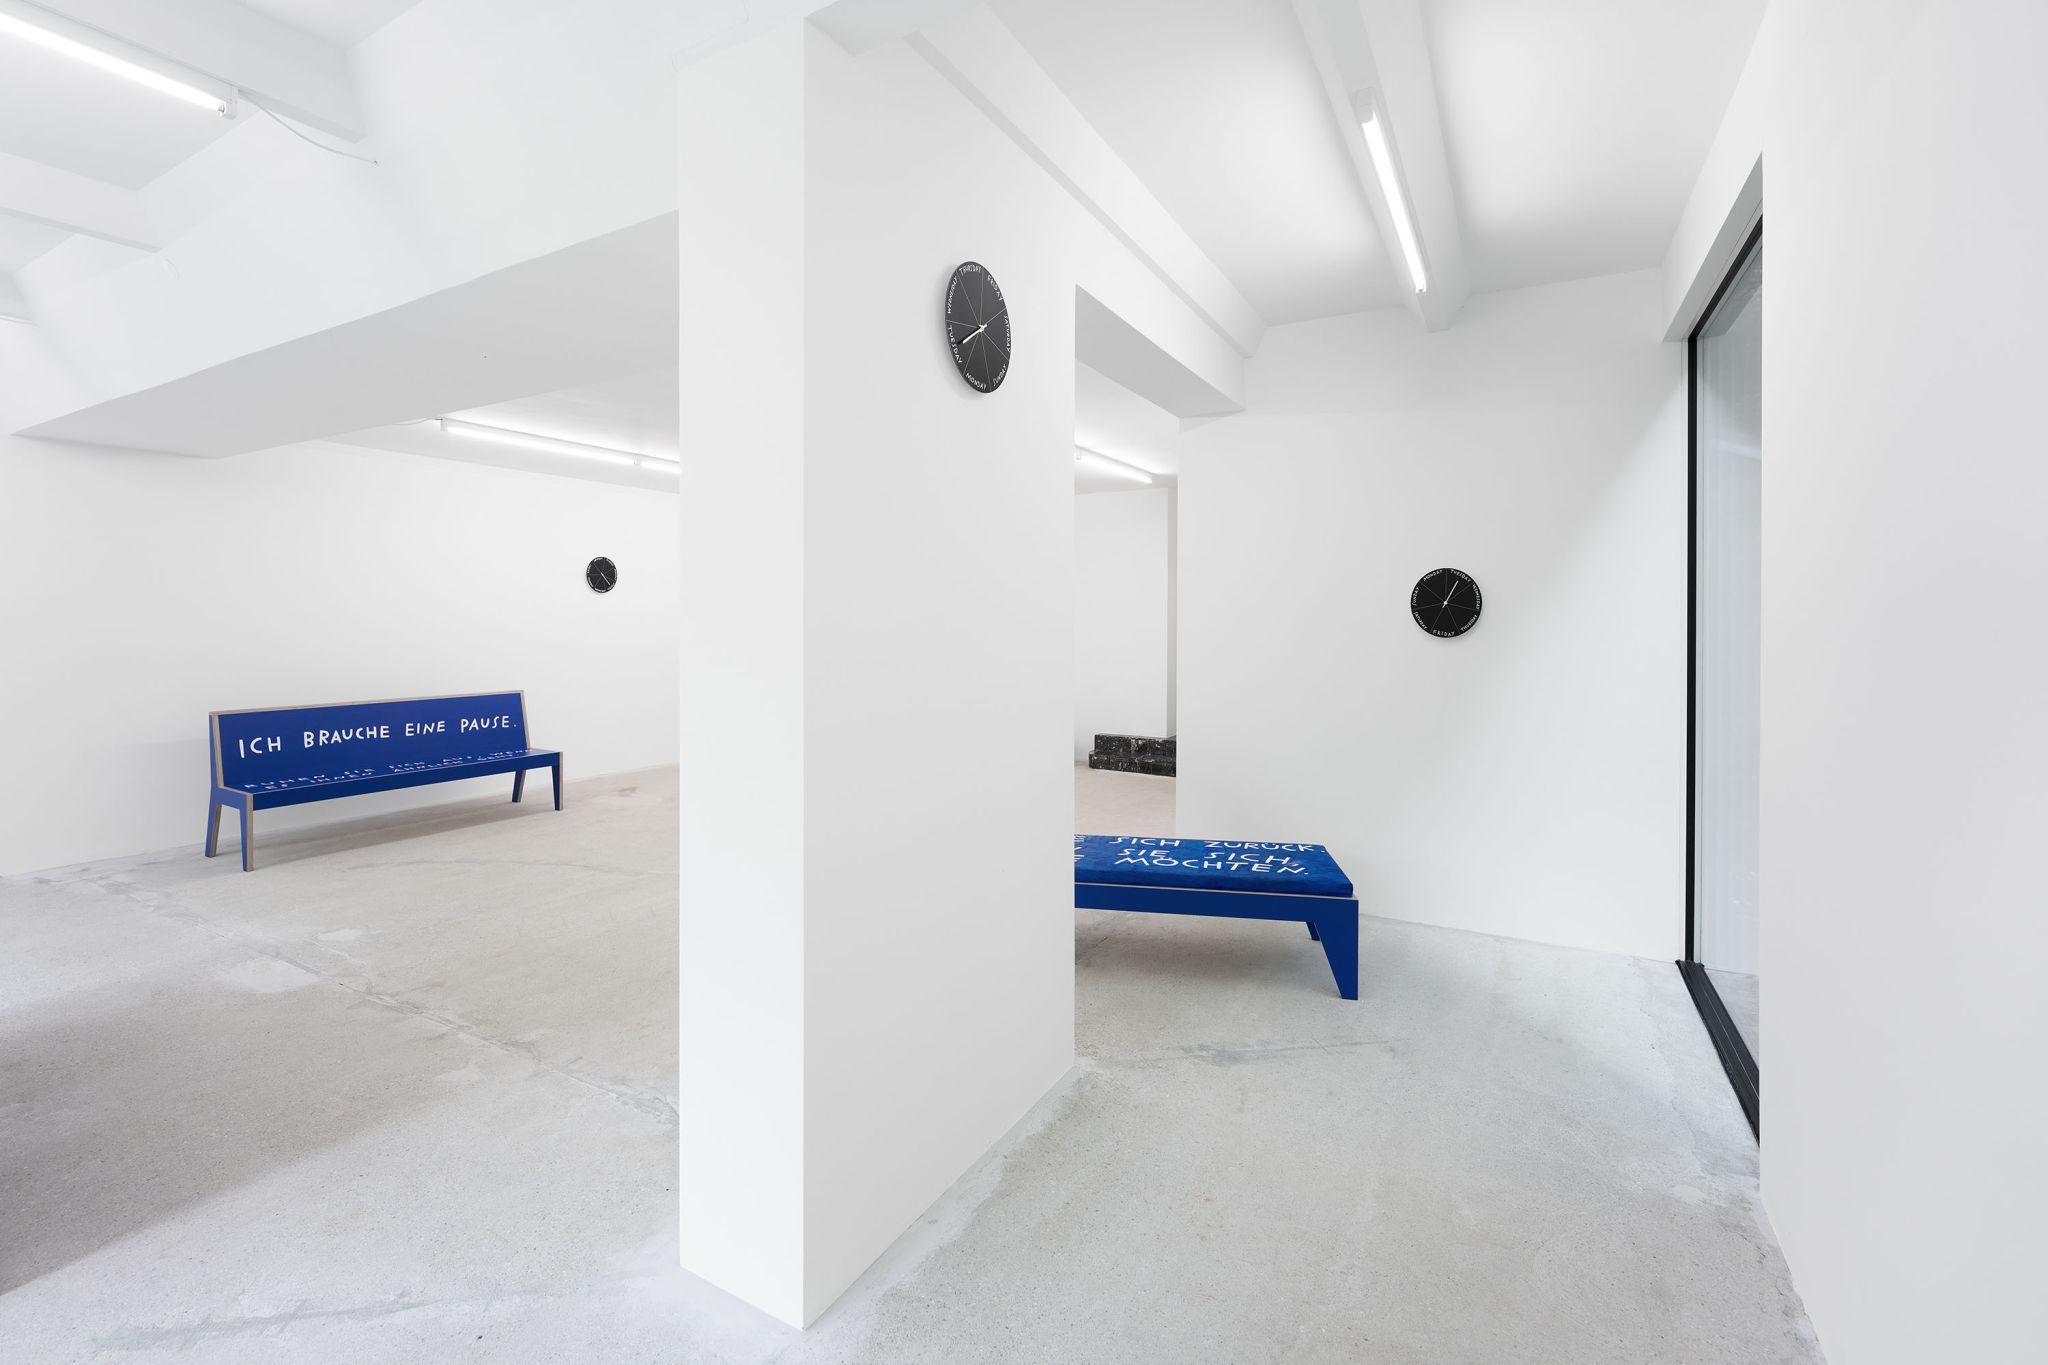 Finnegan Shannon, <em>Slower,</em> Installation view, Deborah Schamoni, 2022, Image description: Inside an exhibition room there is one blue bench with white letters on it. Part of another piece of blue furniture is in view, cut off by column in the space. Three black clocks are hanging on different walls at different heights.